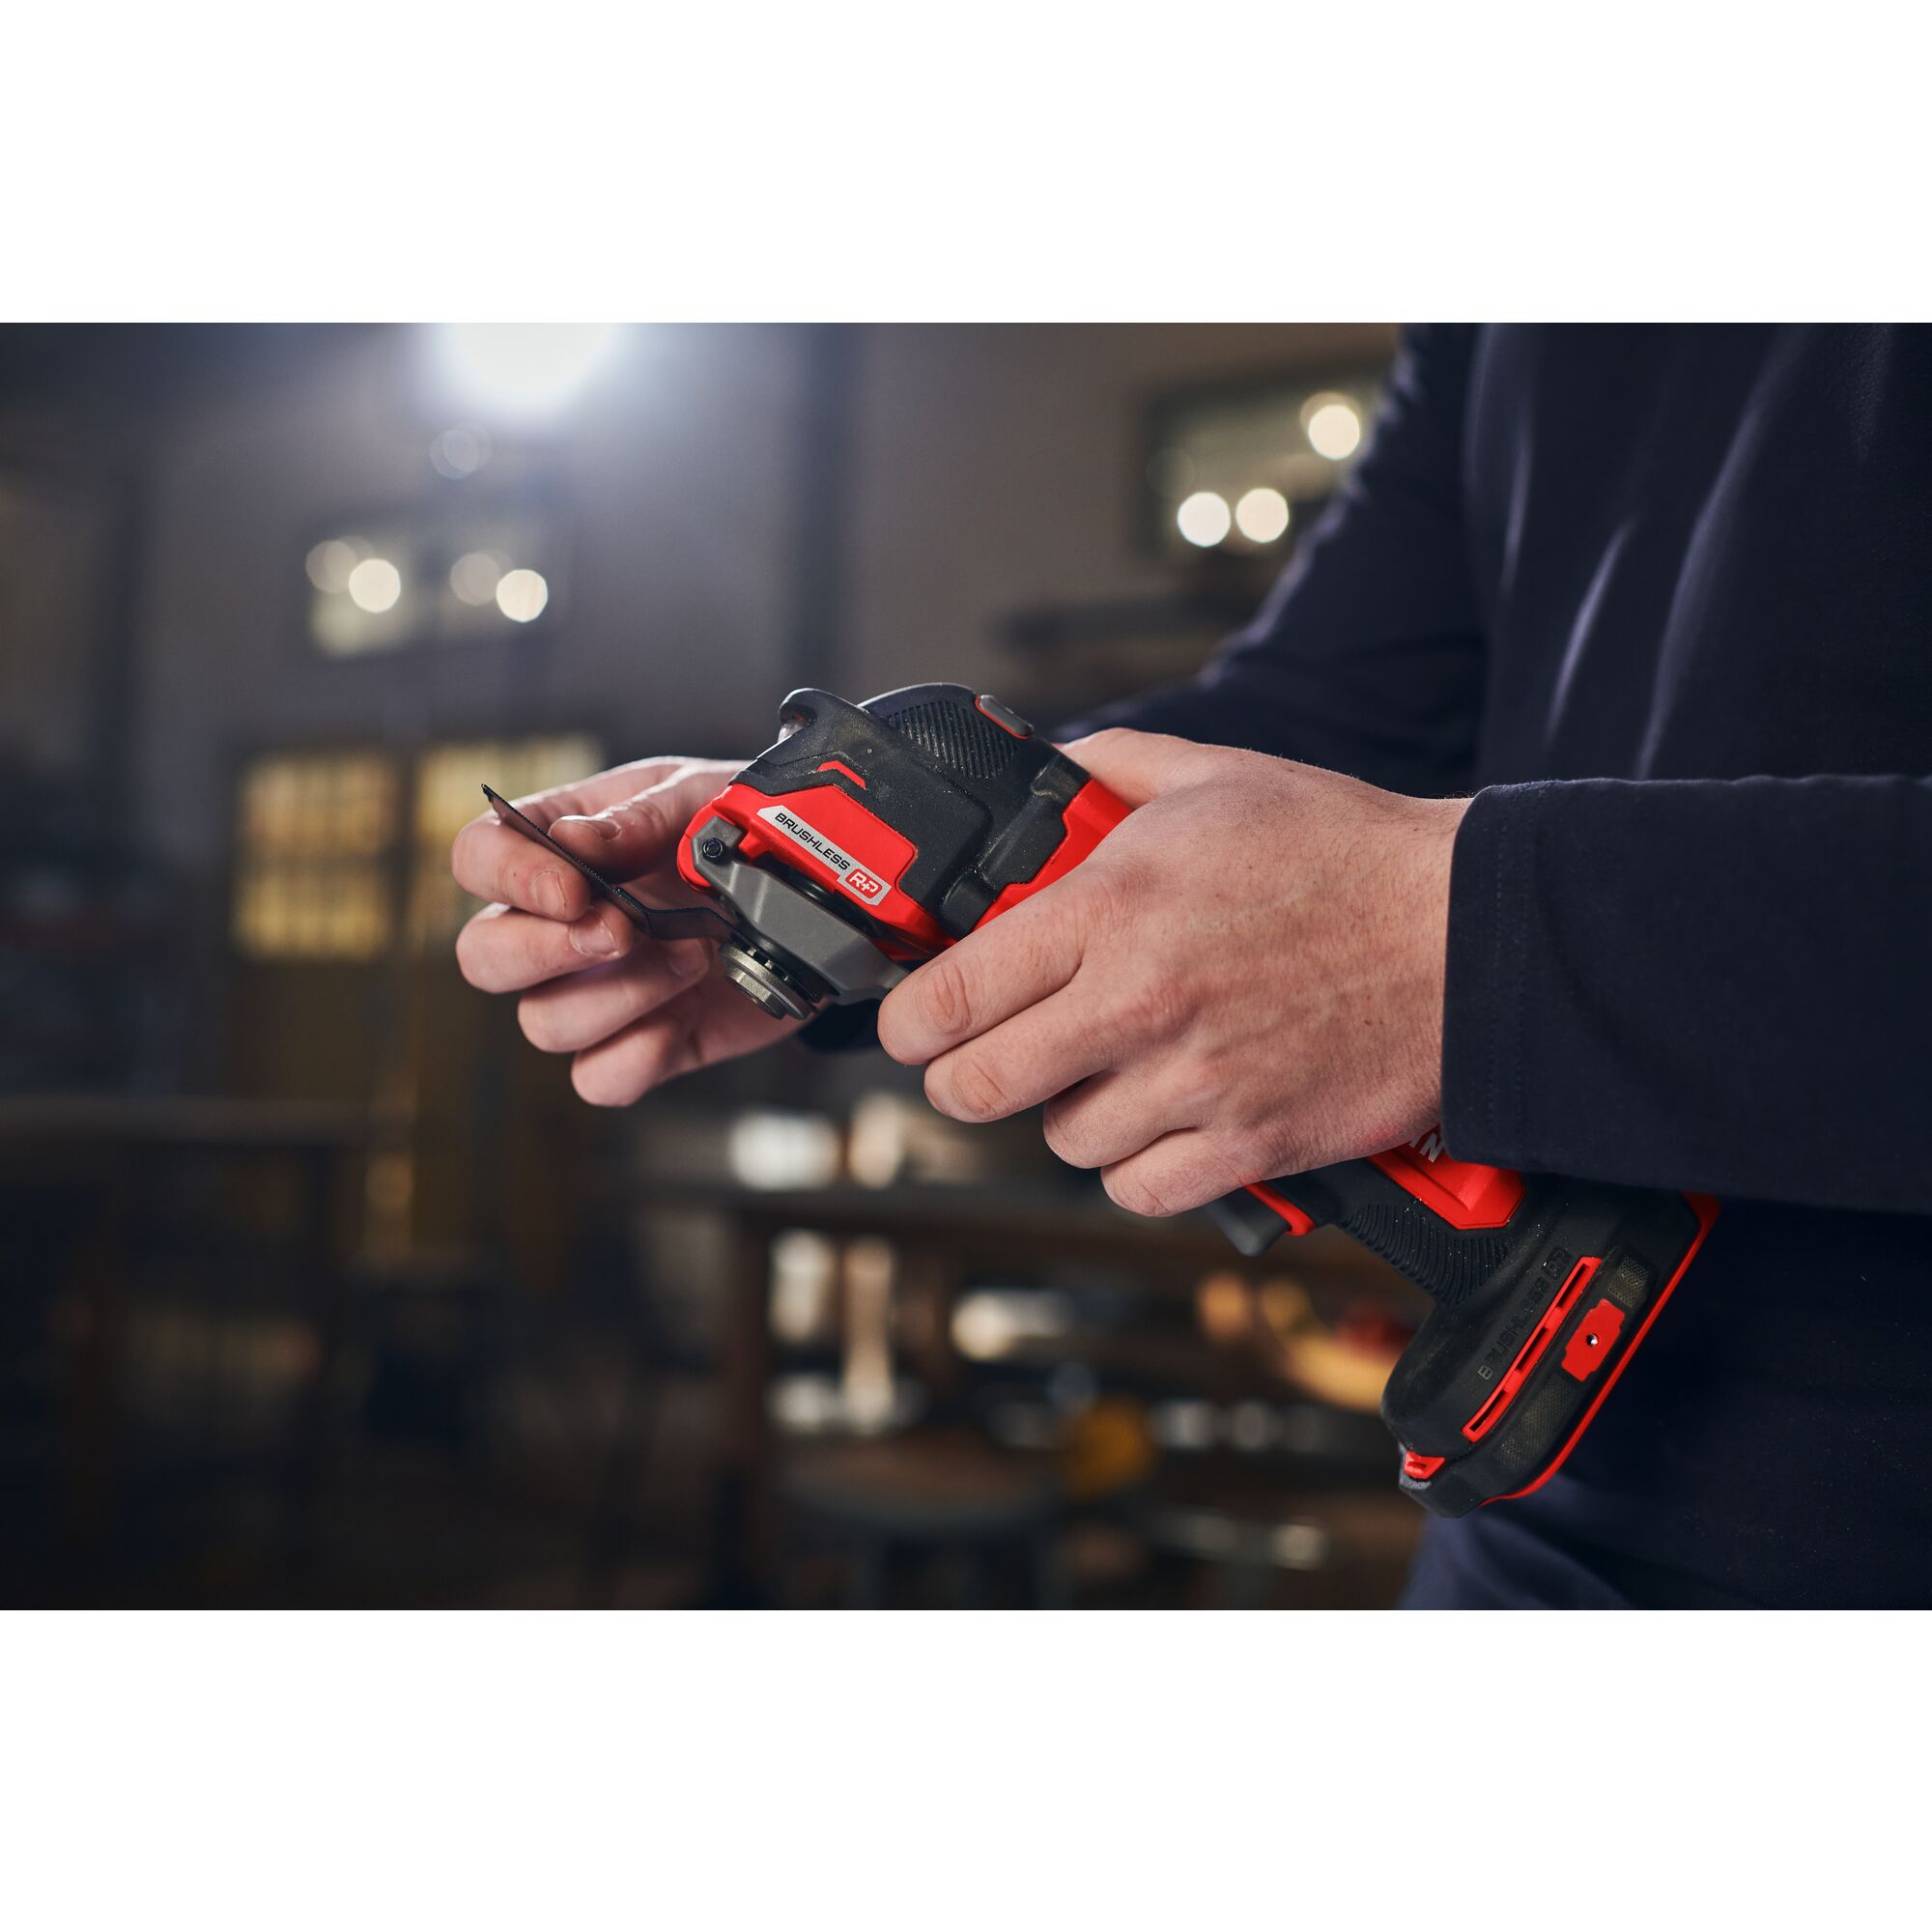 View of CRAFTSMAN Oscillating Multi-Tools being used by consumer